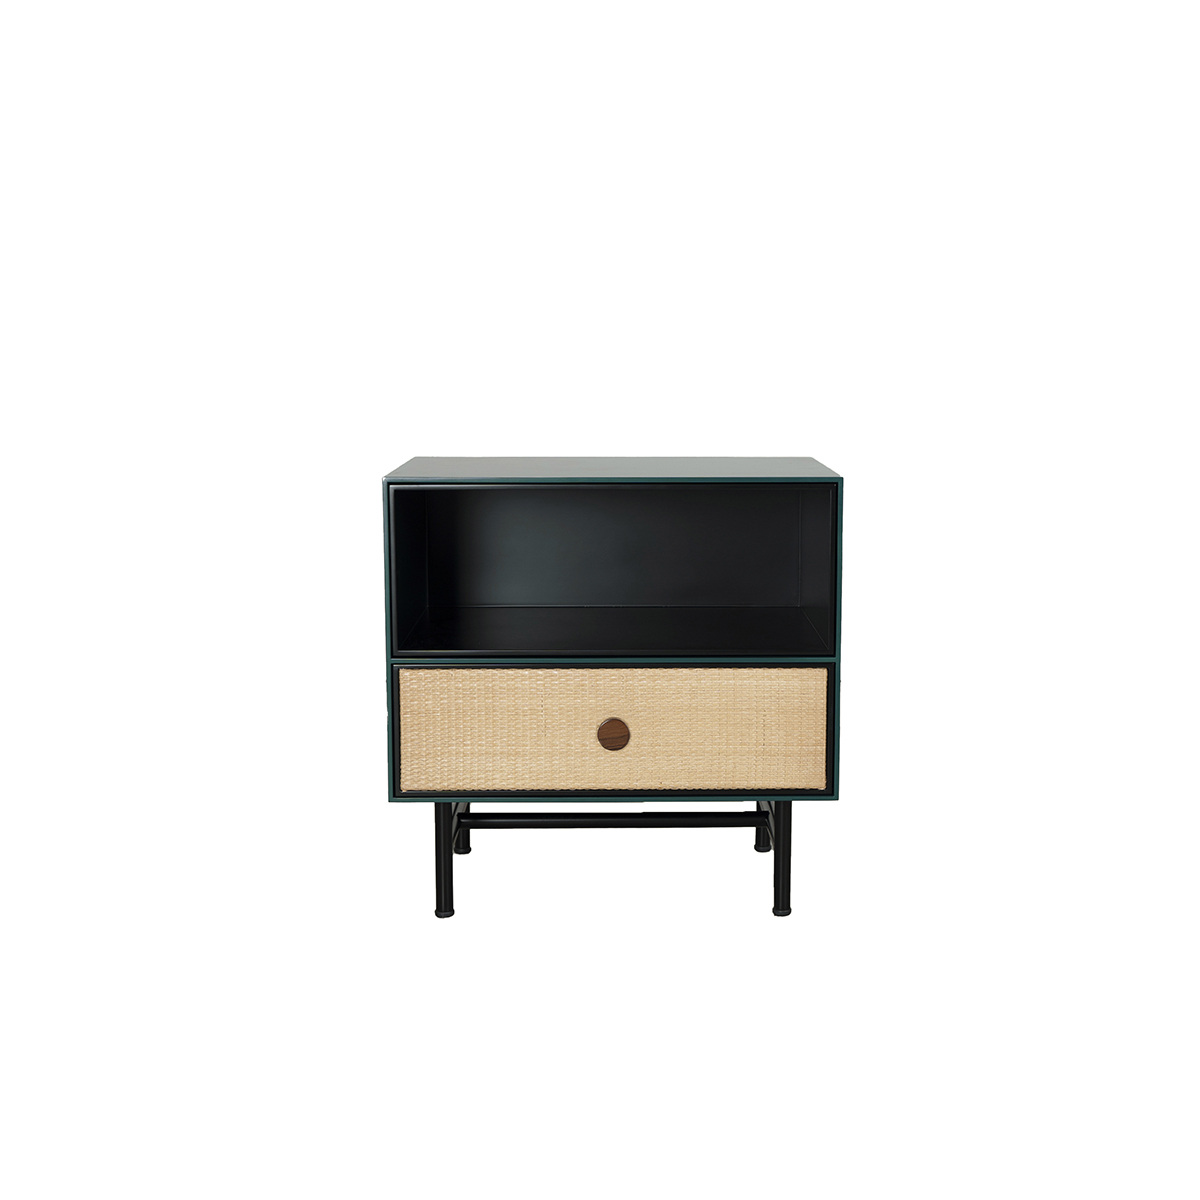 Bedside Table Essence, Black / Ivory - LL55 x W38 x H55 cm - Lacquered wood - image 6